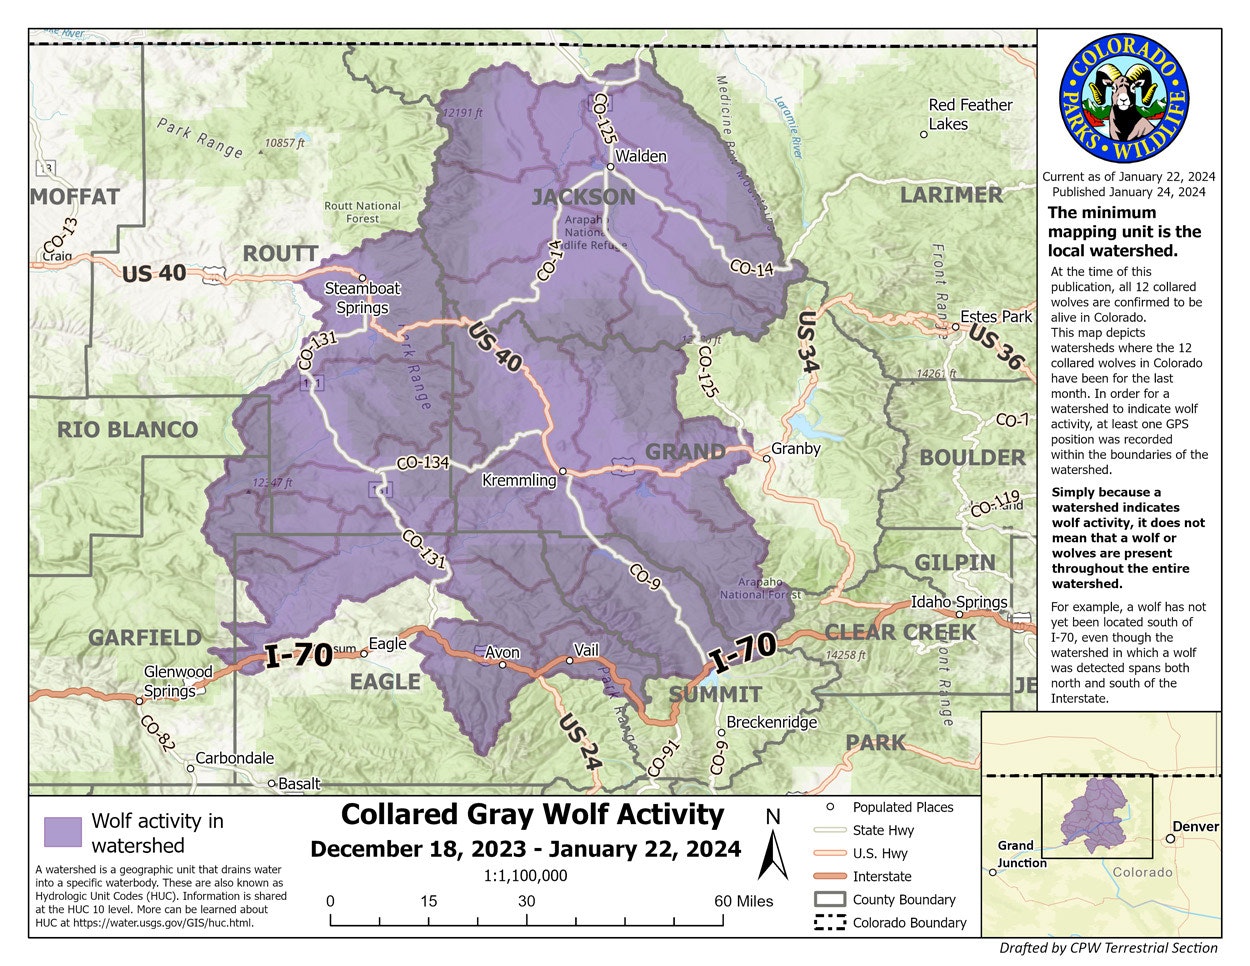 This map shows where gray wolves have been active in Colorado from Dec. 18 through Jan. 22, coming close to the Wyoming border to the north.